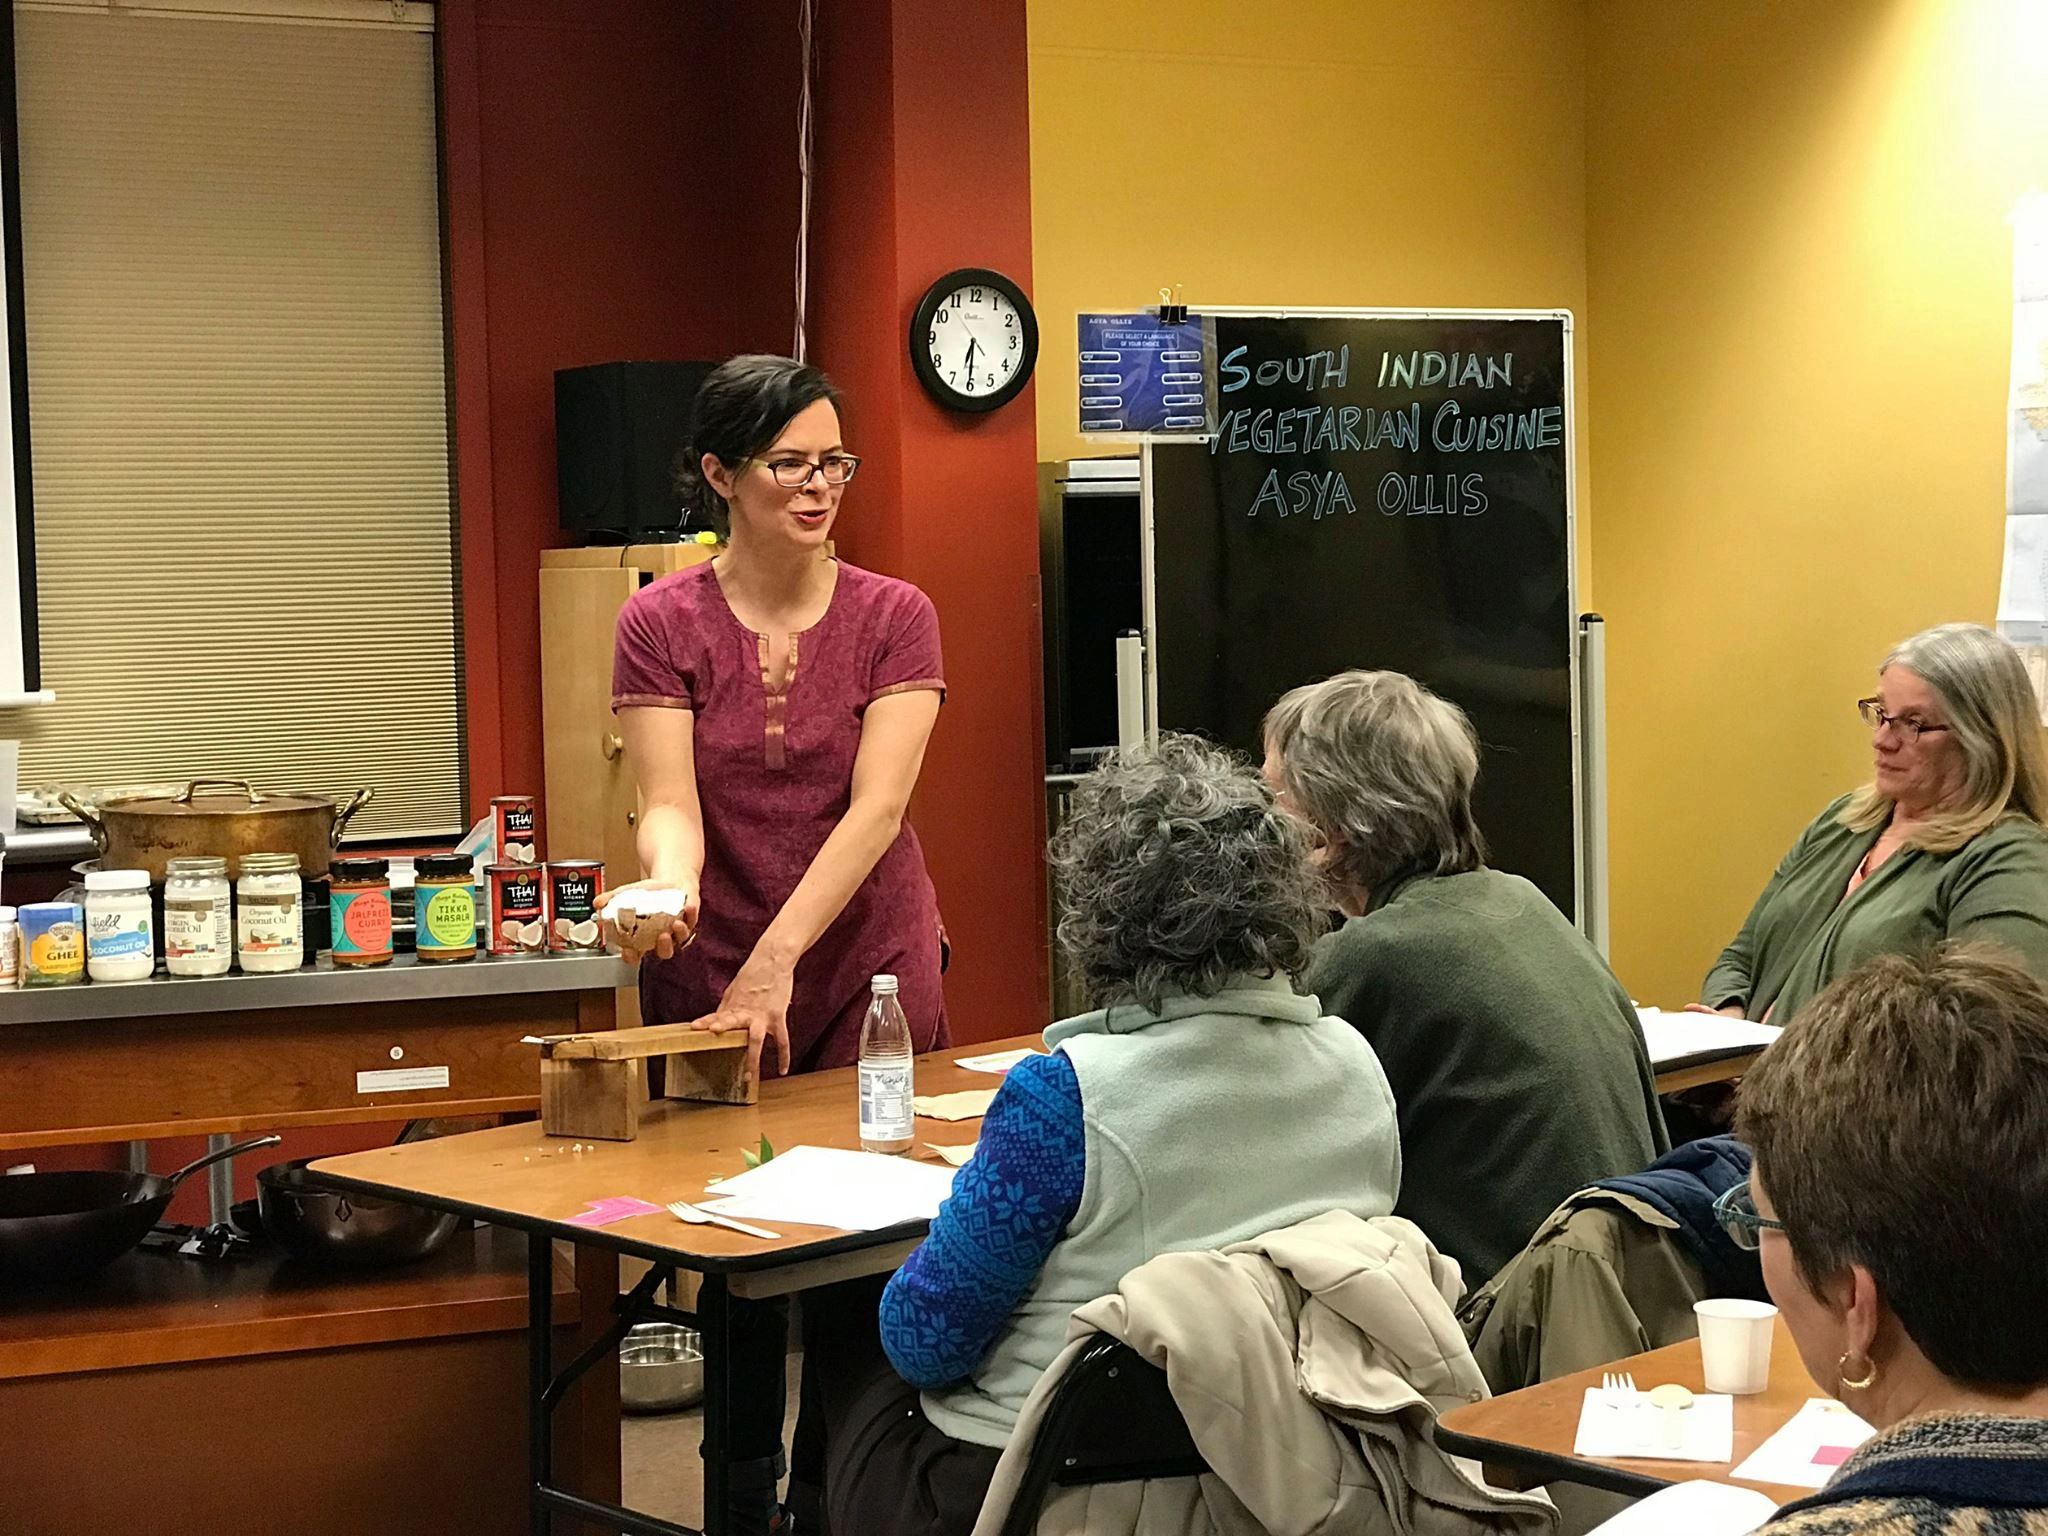 Asya Ollis teaching a course on South Indian Cuisine at GreenStar in Ithaca, NY.
